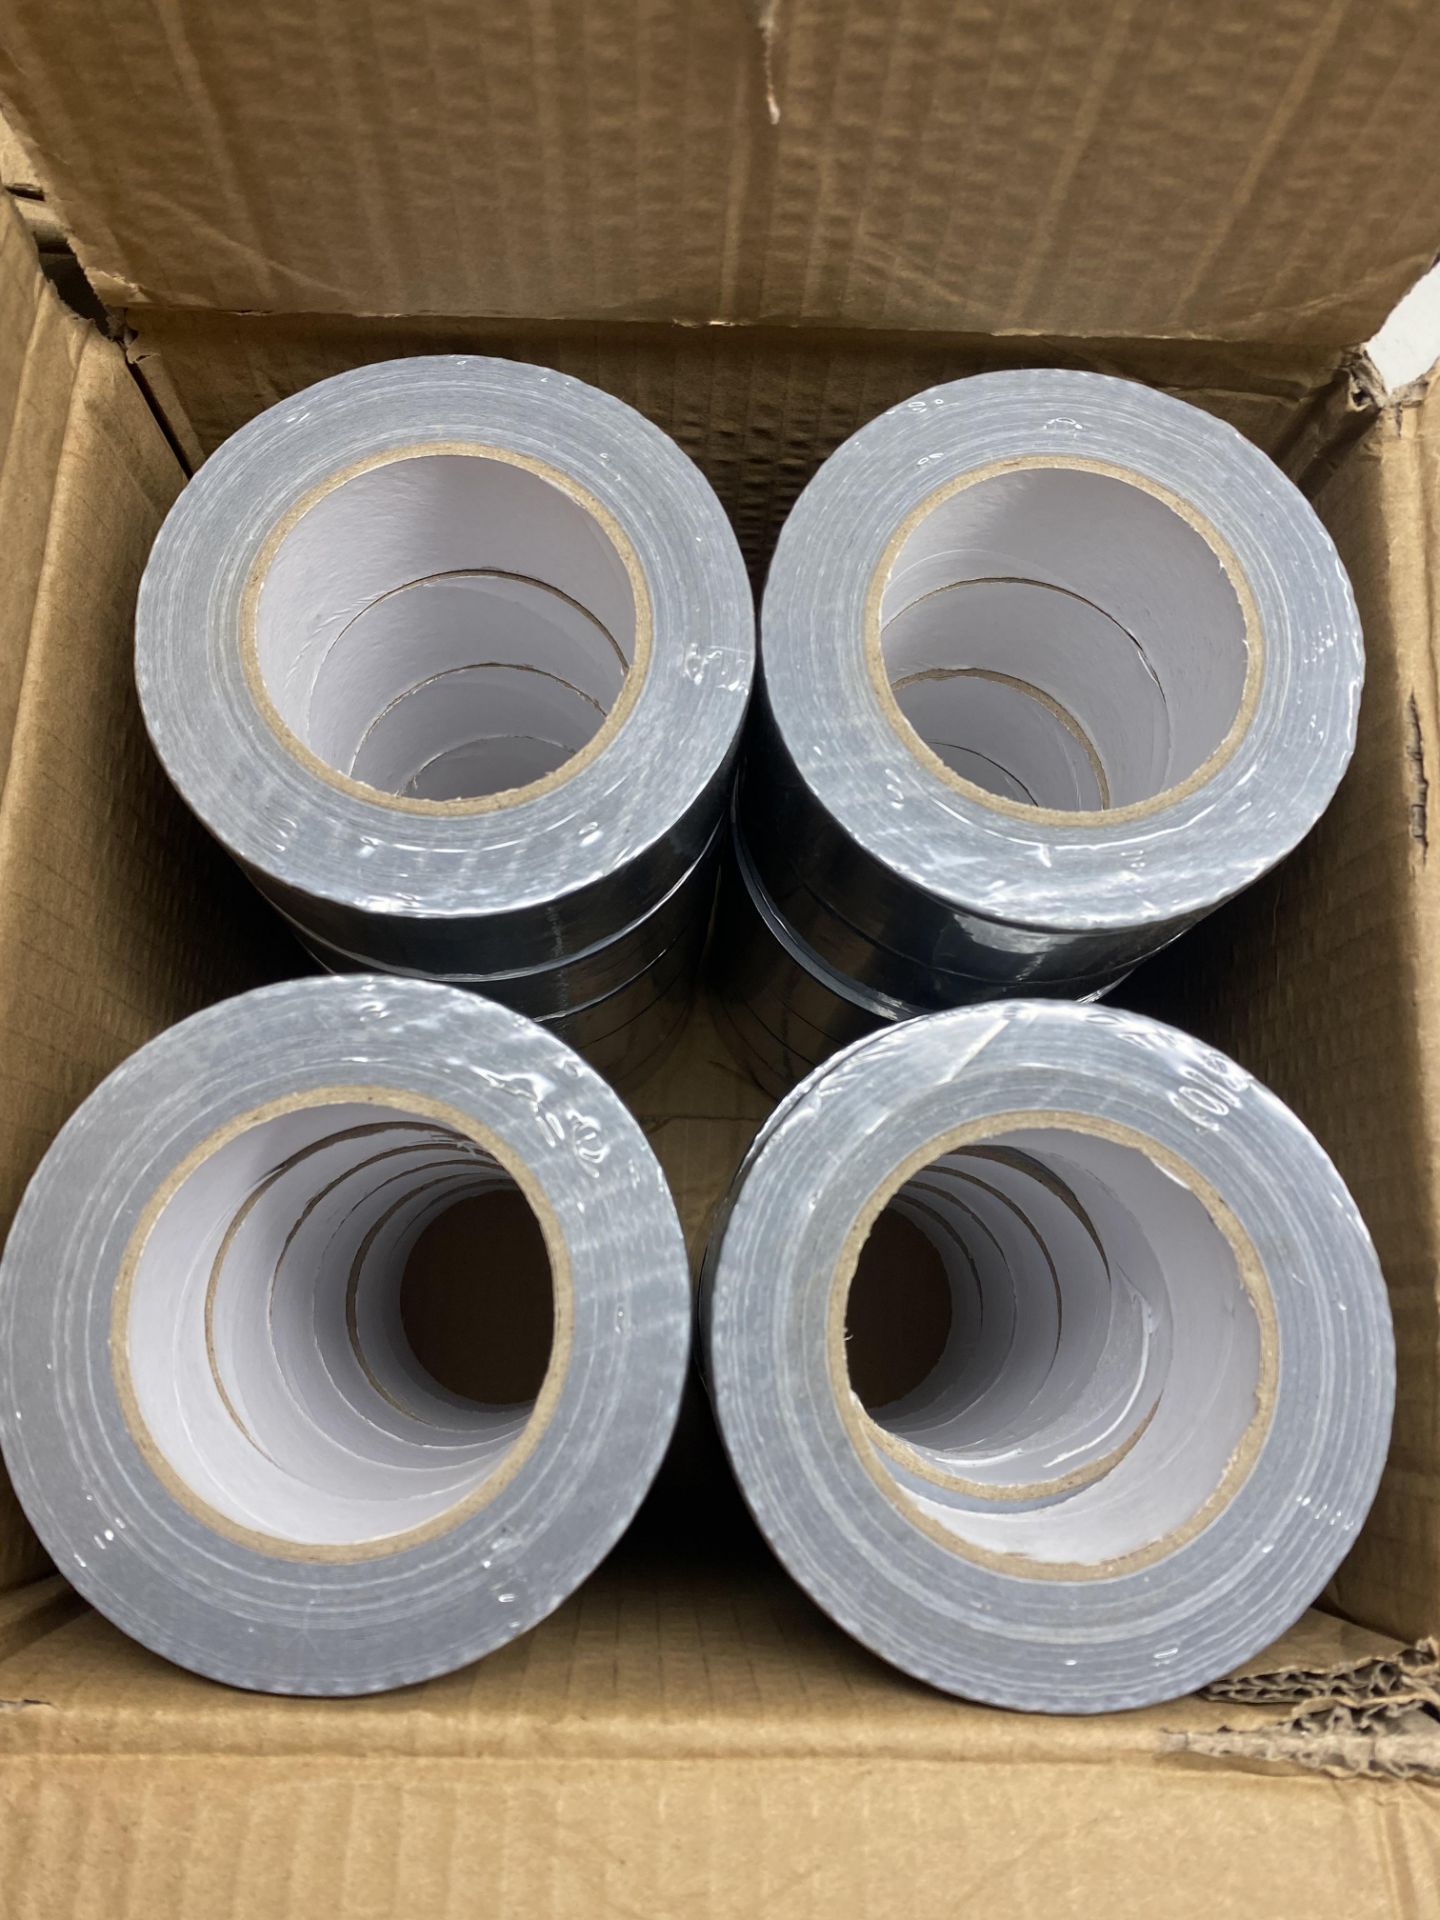 48 x Rolls Of 48mm x 50mm Silver Duct Tape - Image 3 of 4